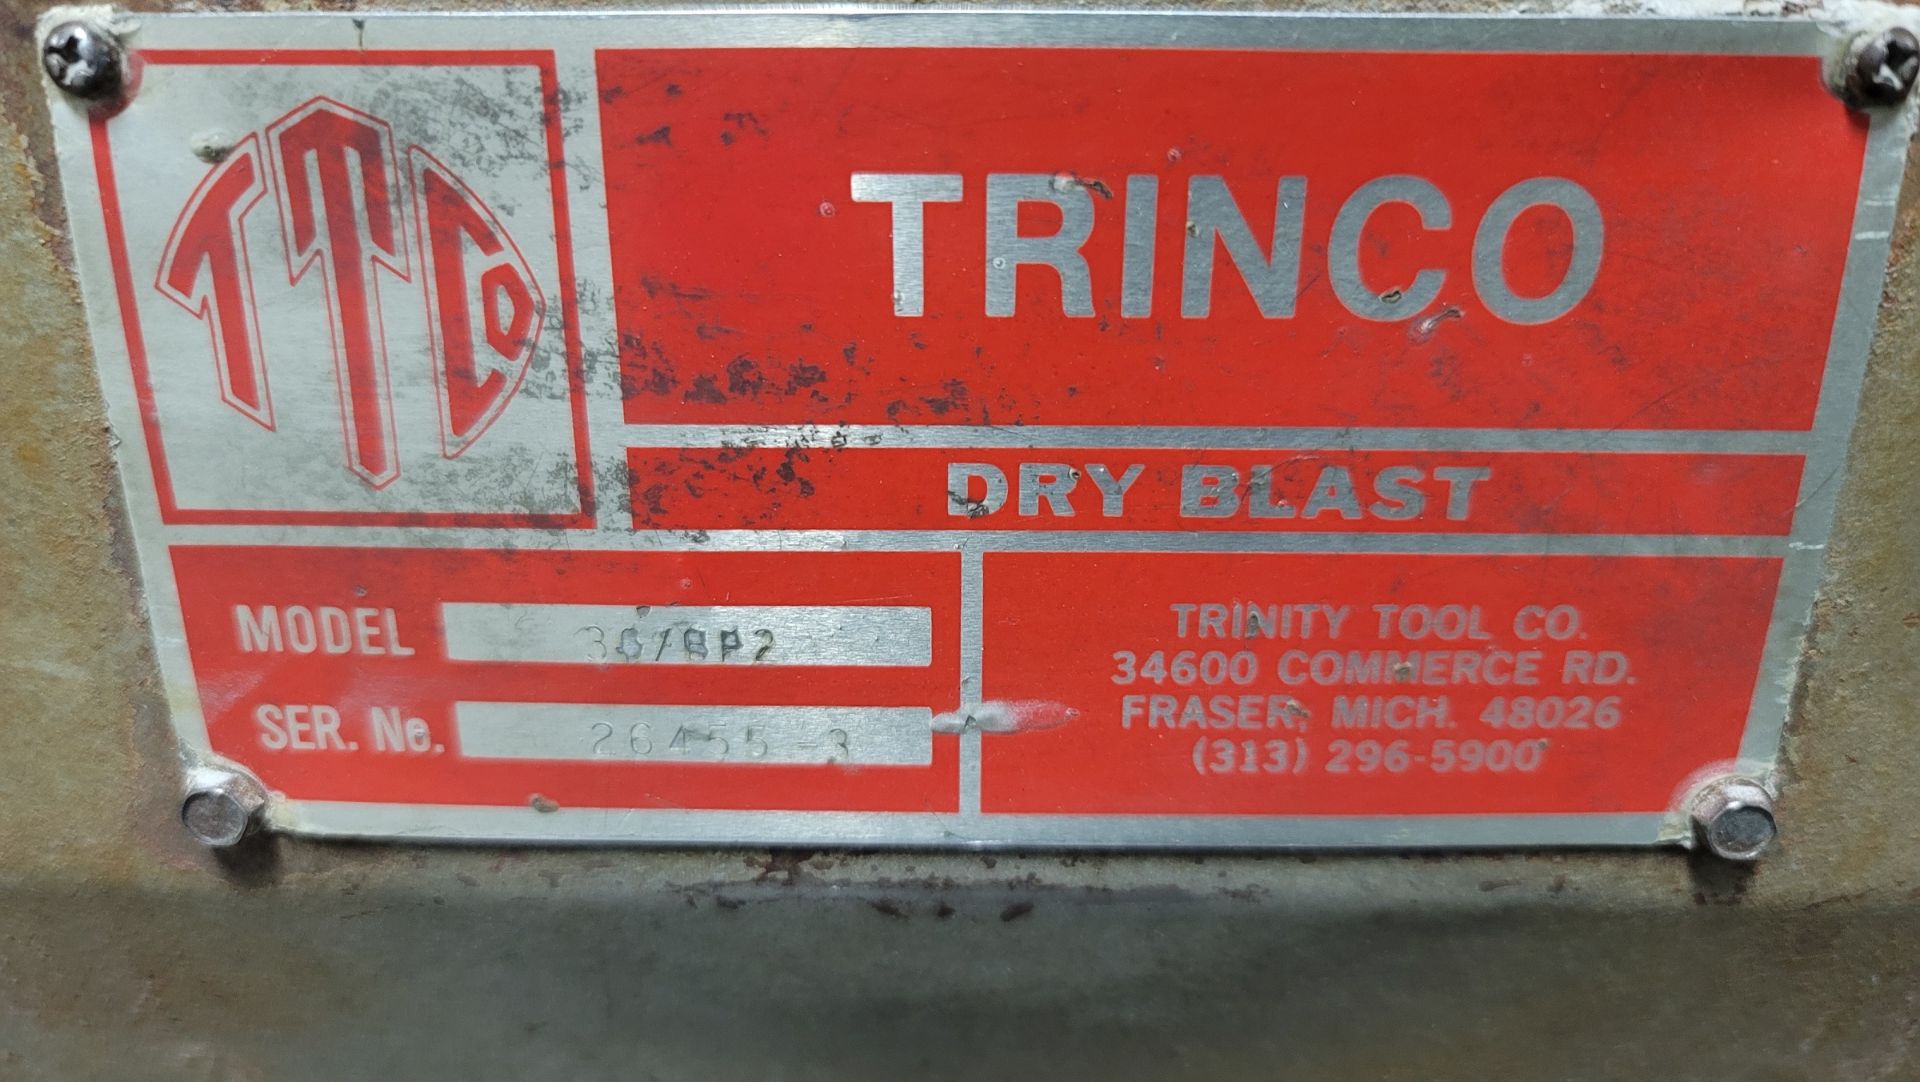 TRINCO DRY BEAD BLASTER, MODEL 36/BP2, S/N 26455-3, W/ DELTA DUST COLLECTOR, **IMMEX REGISTERED - Image 3 of 3